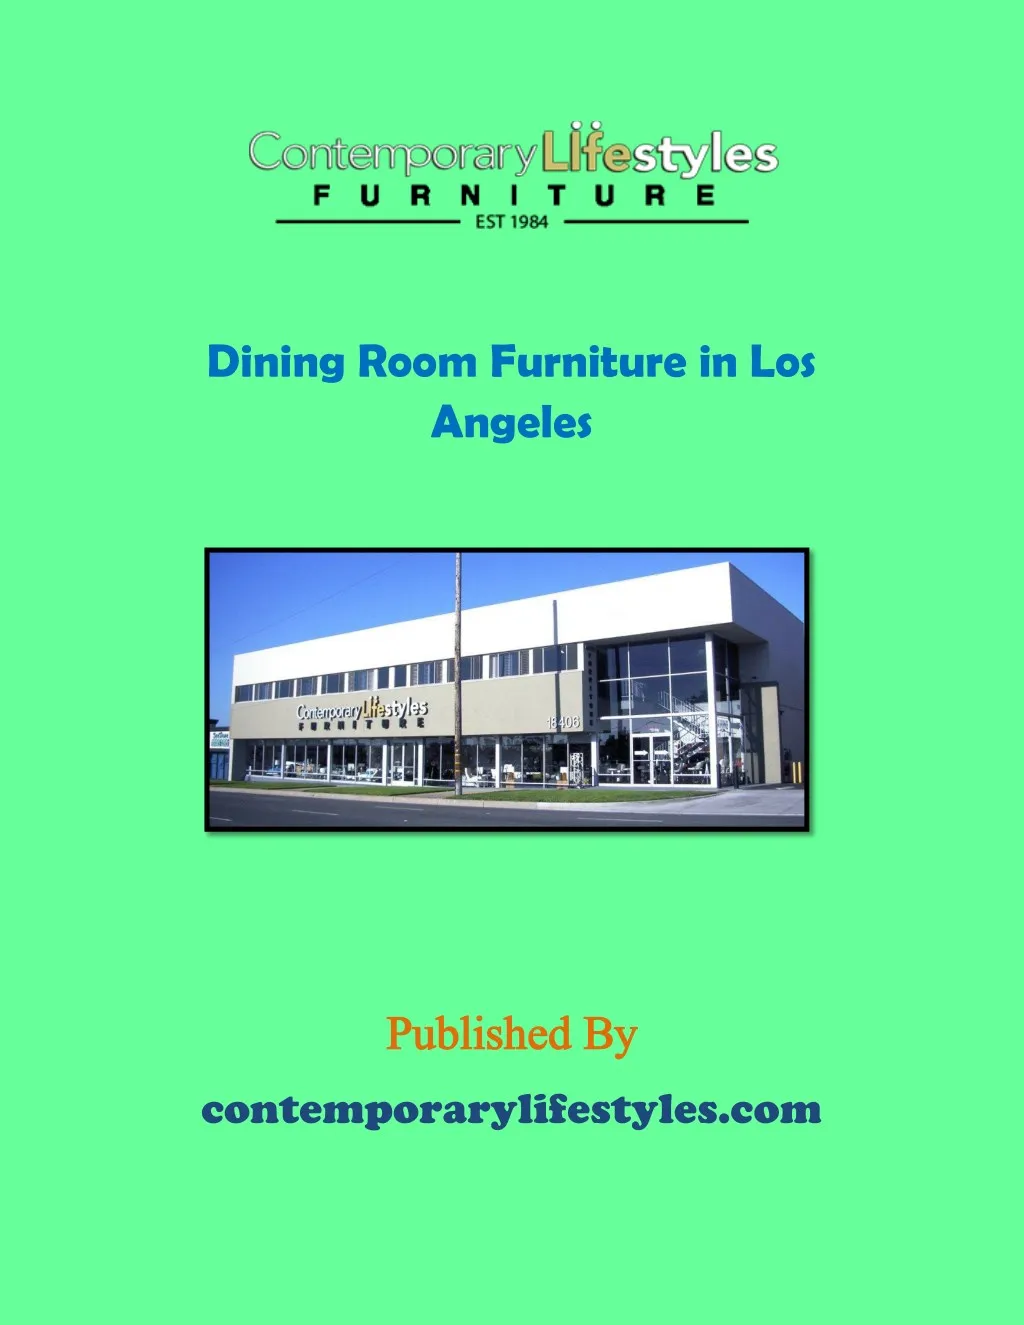 dining room furniture in los angeles